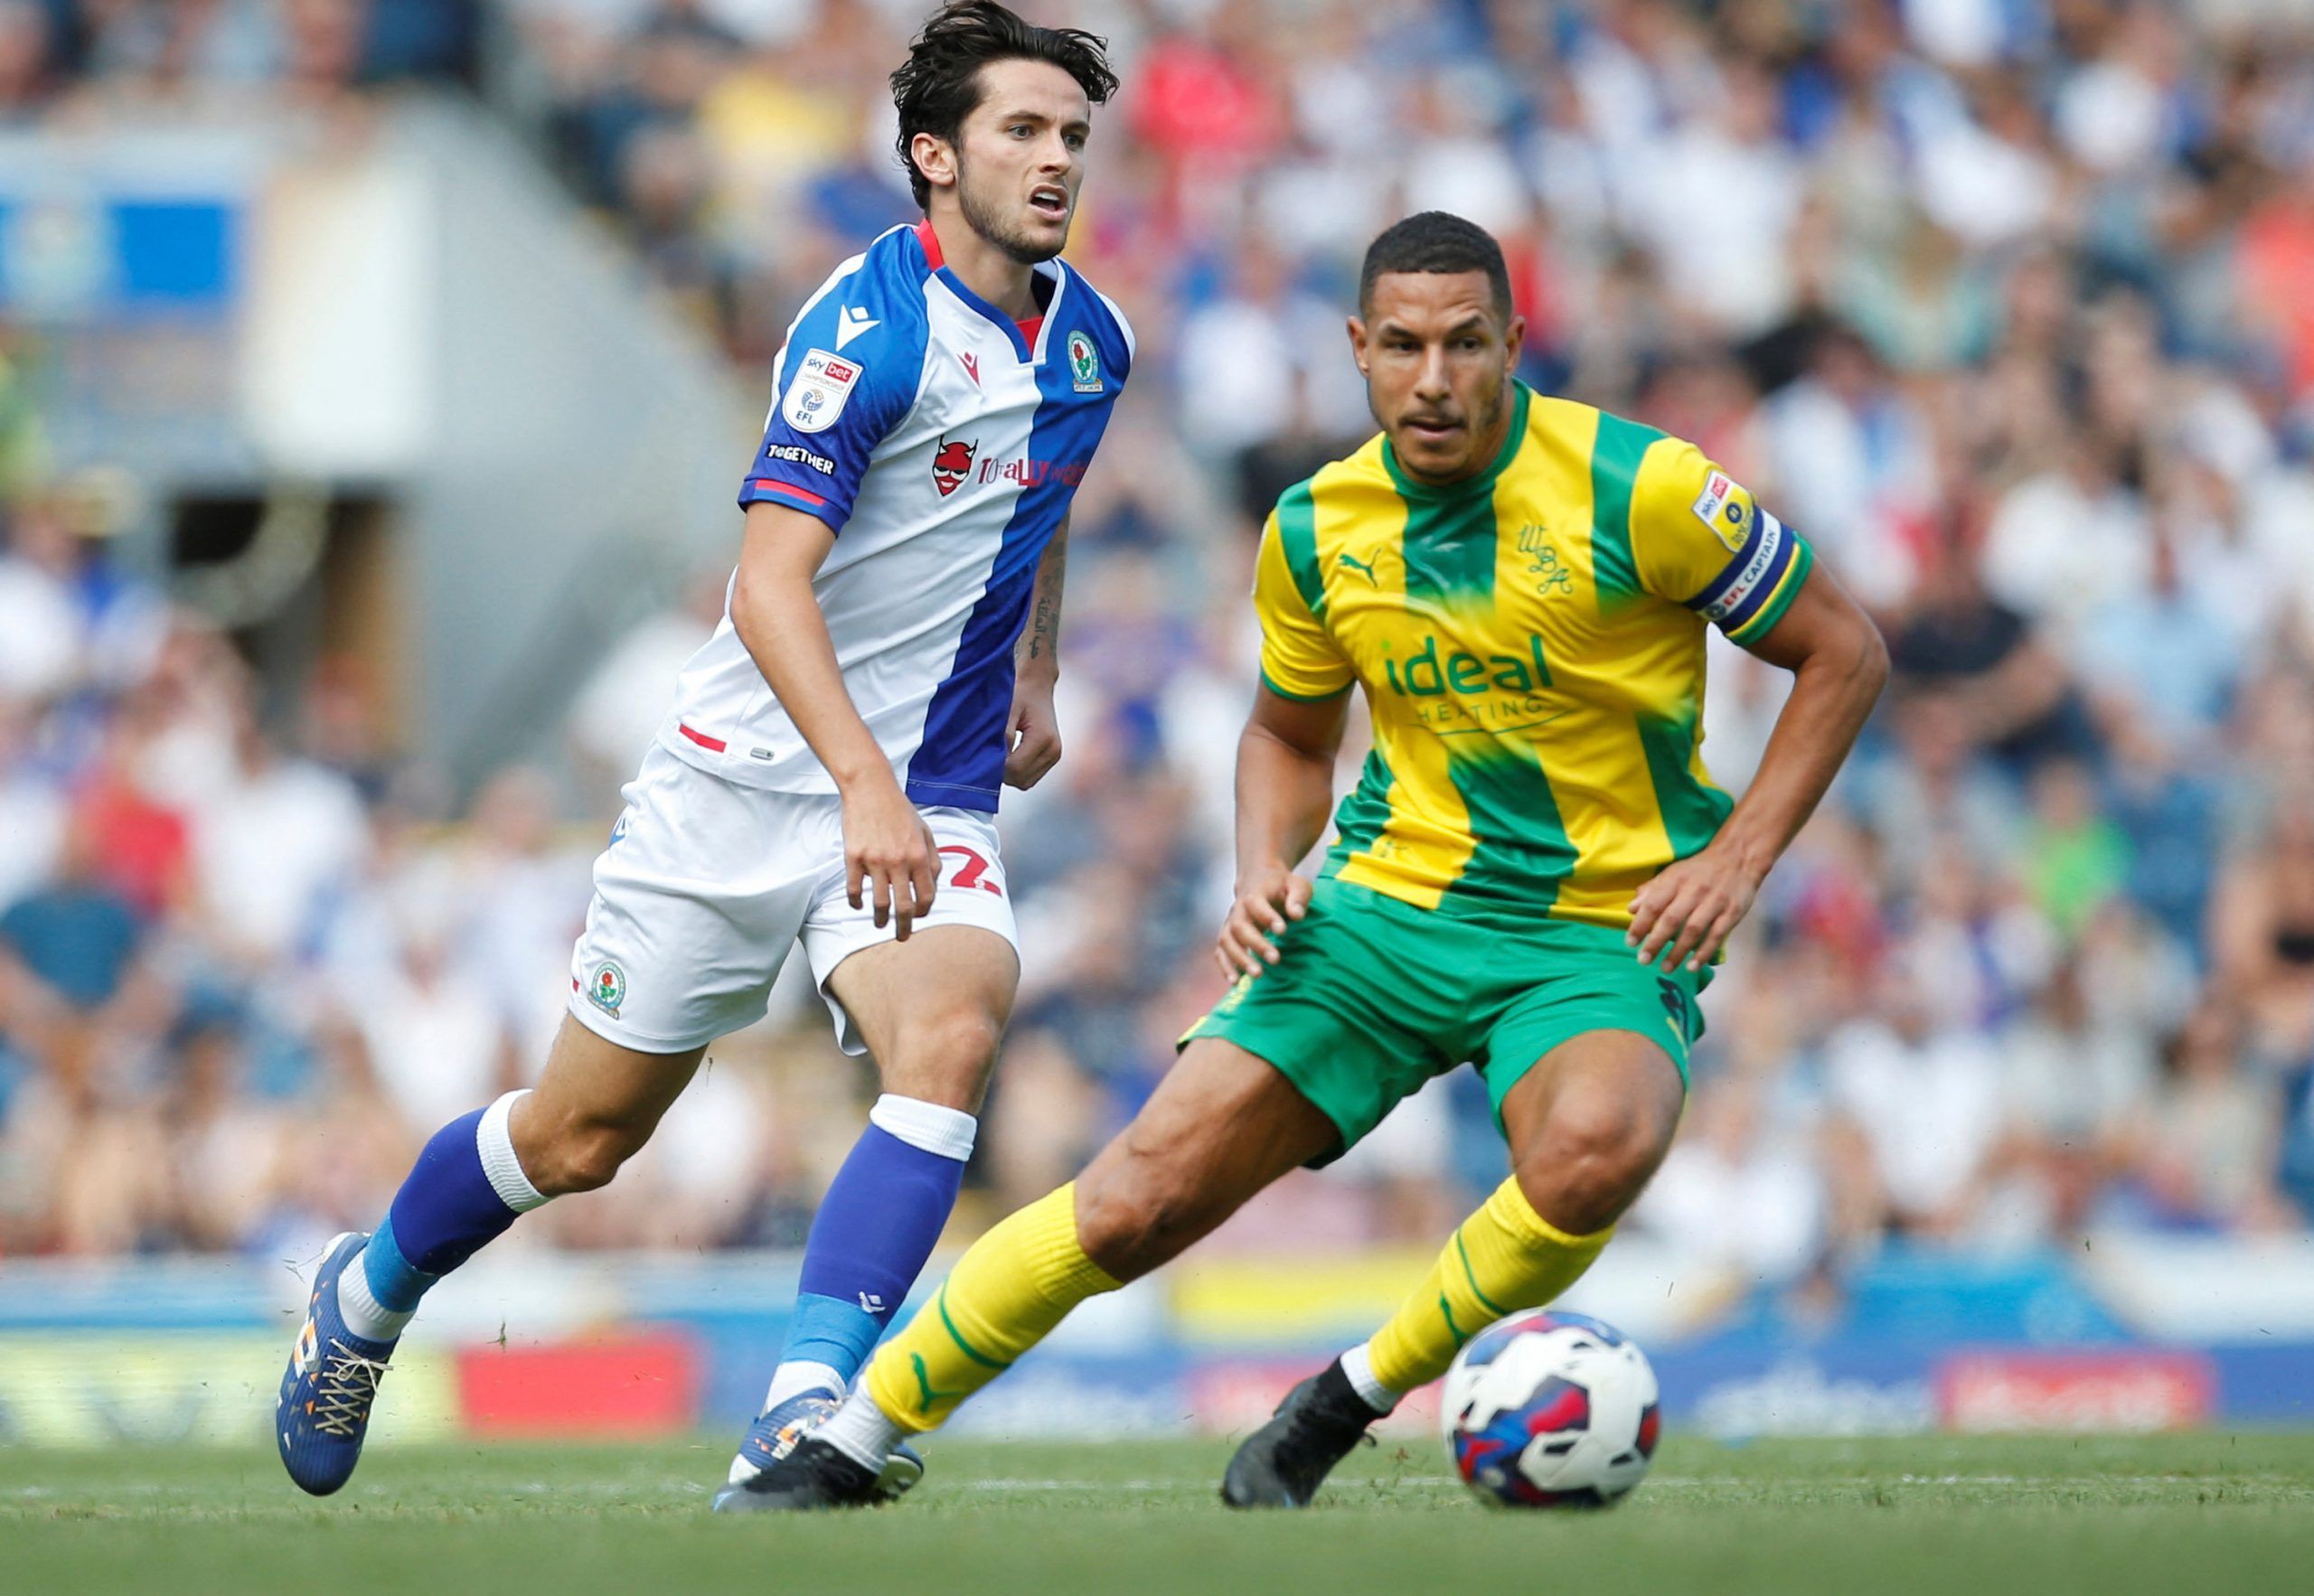 Soccer Football - Championship - Blackburn Rovers v West Bromwich Albion - Ewood Park, Blackburn, Britain - August 14, 2022 Blackburn Rovers' Lewis Travis in action with West Bromwich Albion's Jake Livermore  Action Images/Ed Sykes  EDITORIAL USE ONLY. No use with unauthorized audio, video, data, fixture lists, club/league logos or 